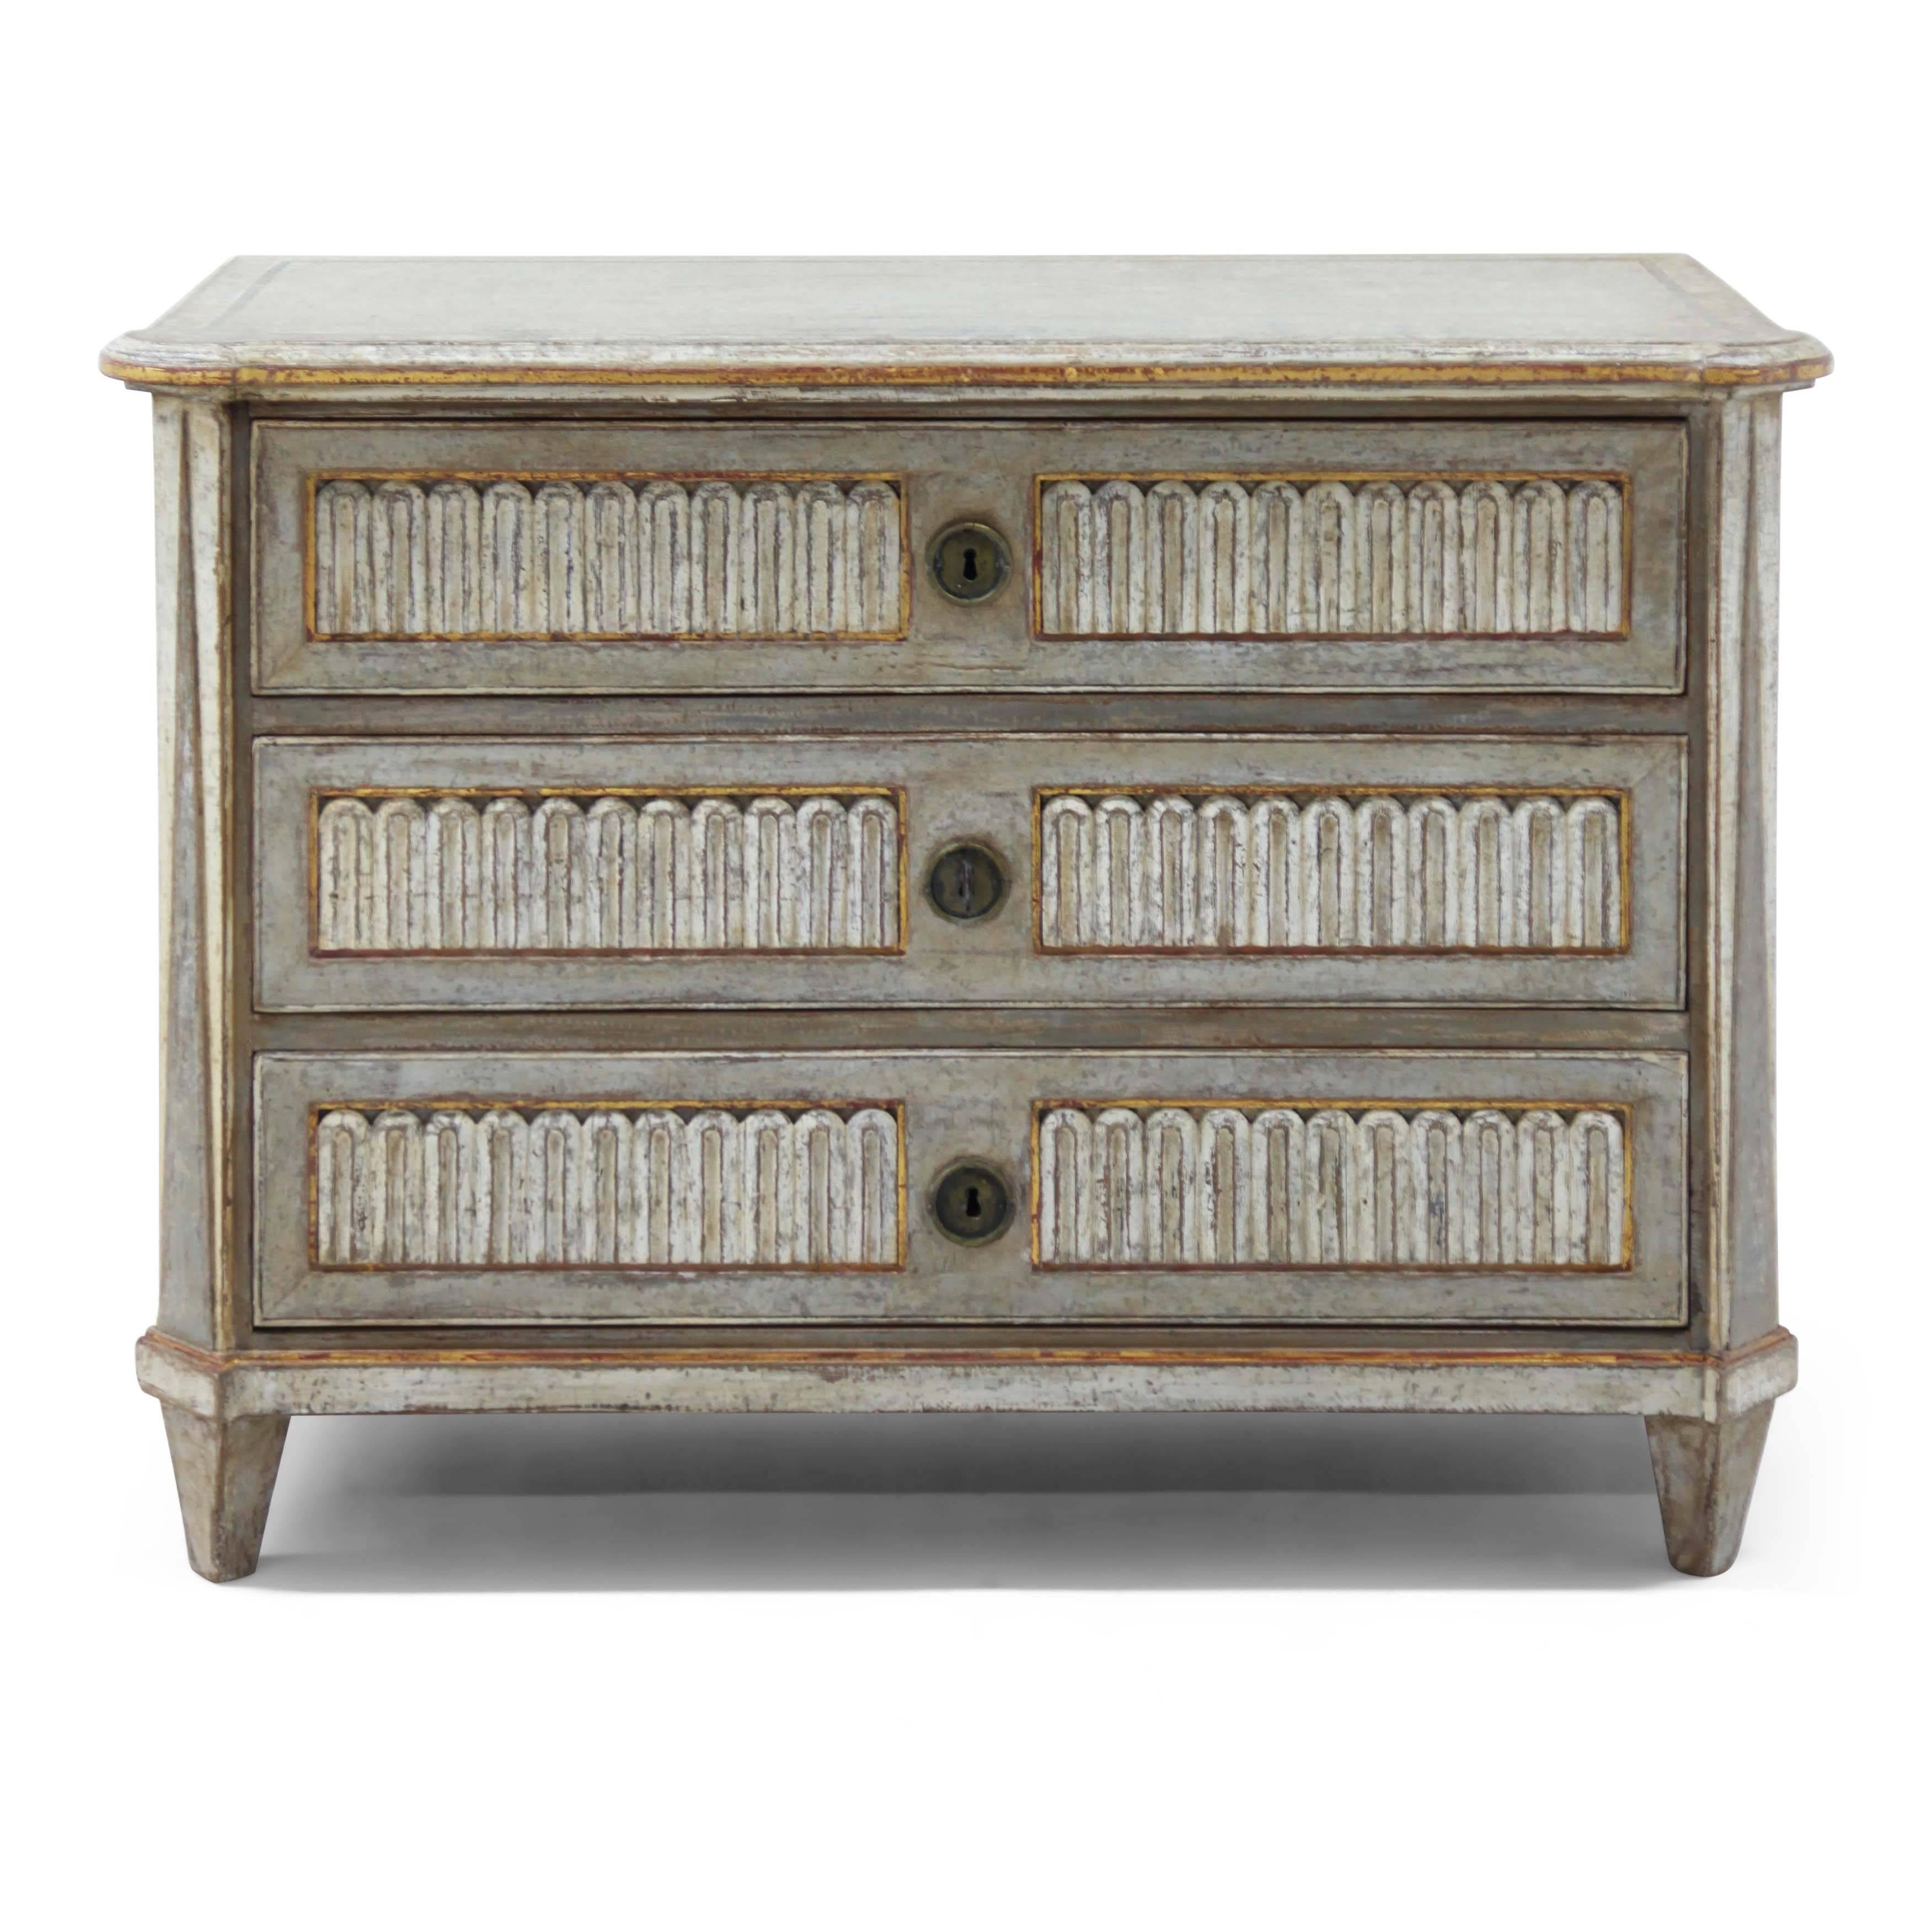 Three-drawered neoclassical chest of drawers with slanted corners, standing on tapered feet. The front and corners show carved details. The Gustavian style white and grey paint is new and has a worn look to it.